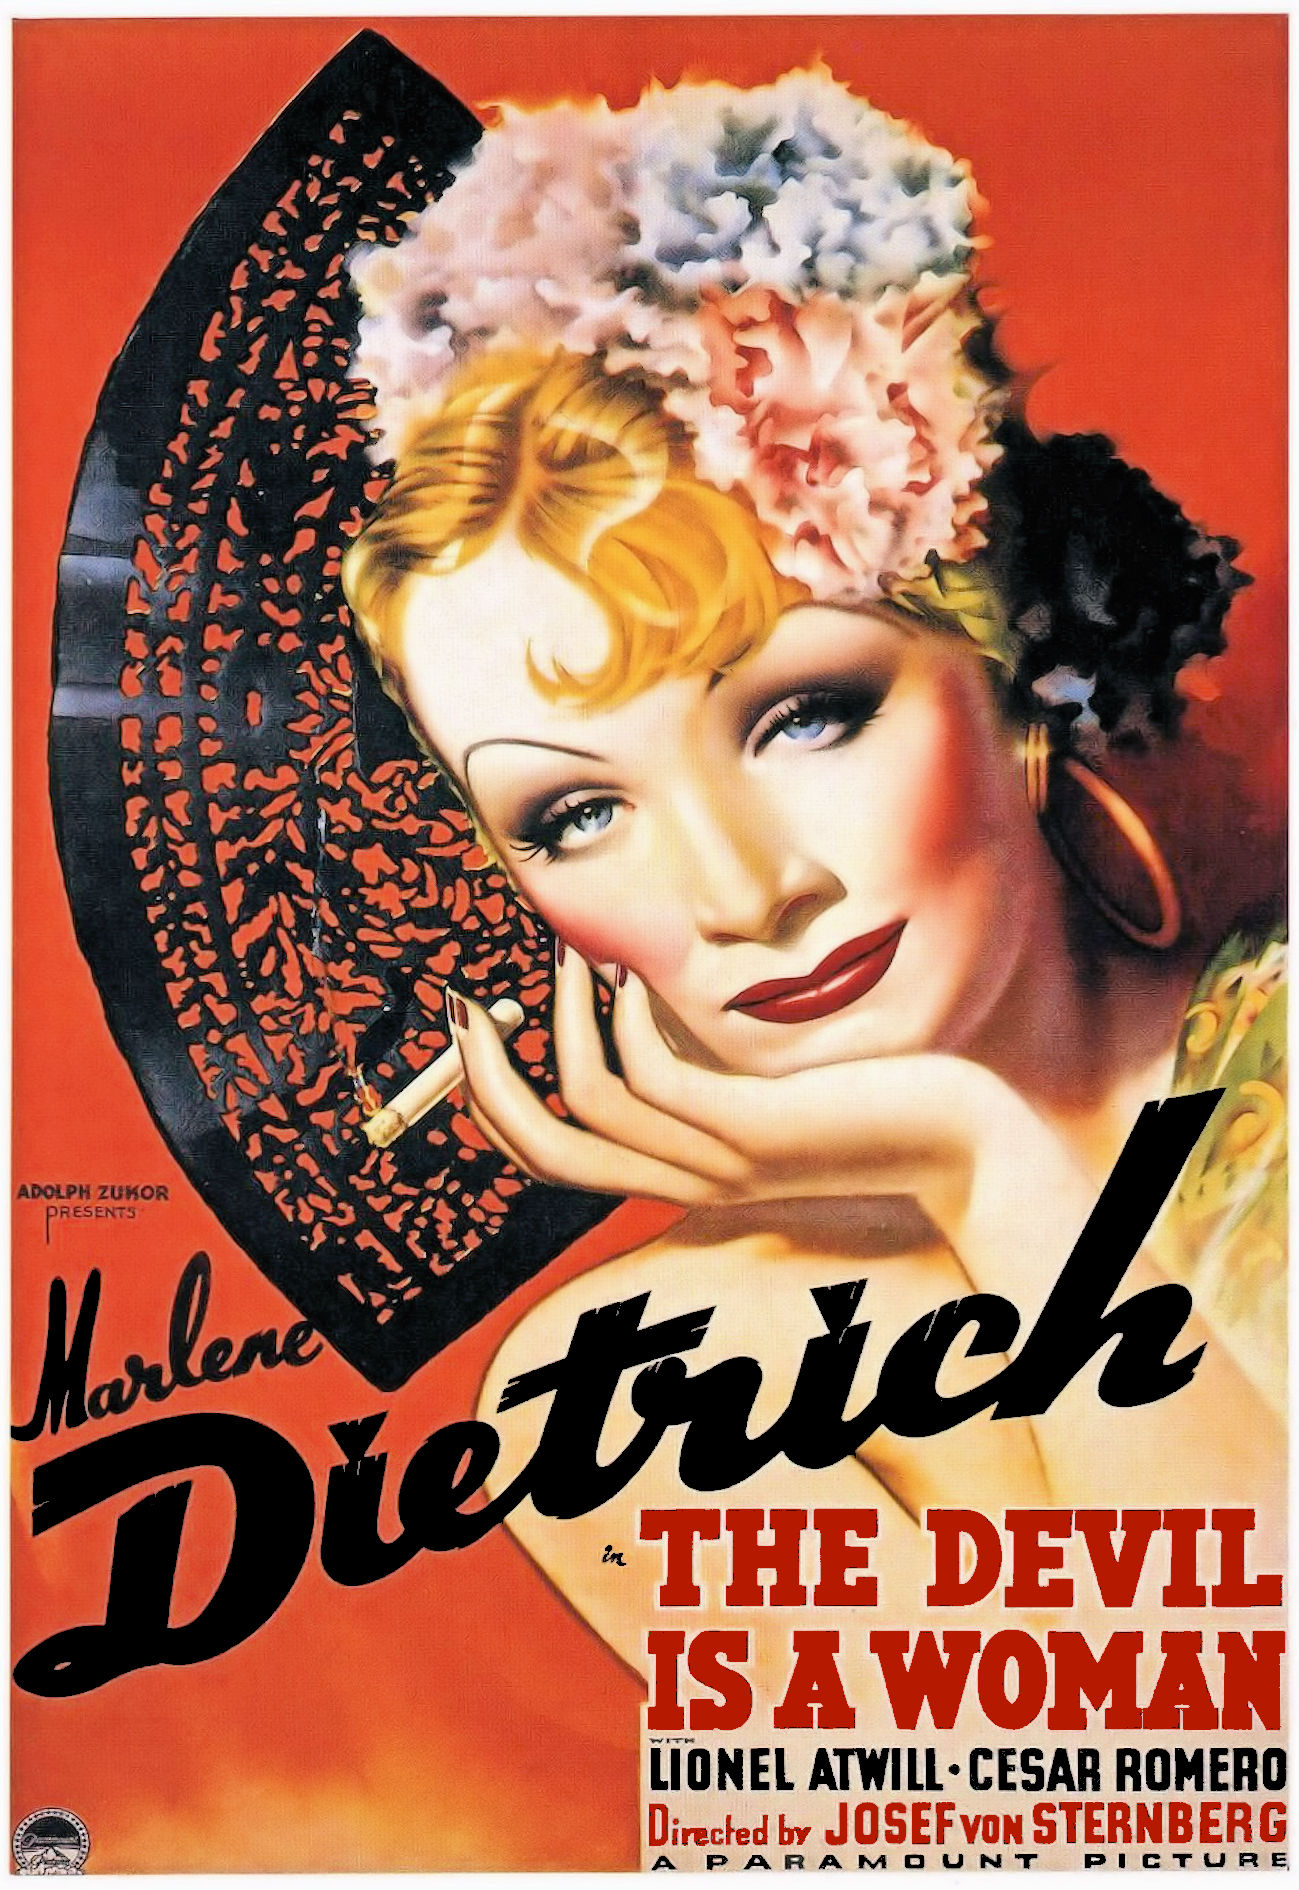 THE DEVIL IS A WOMAN (1935)